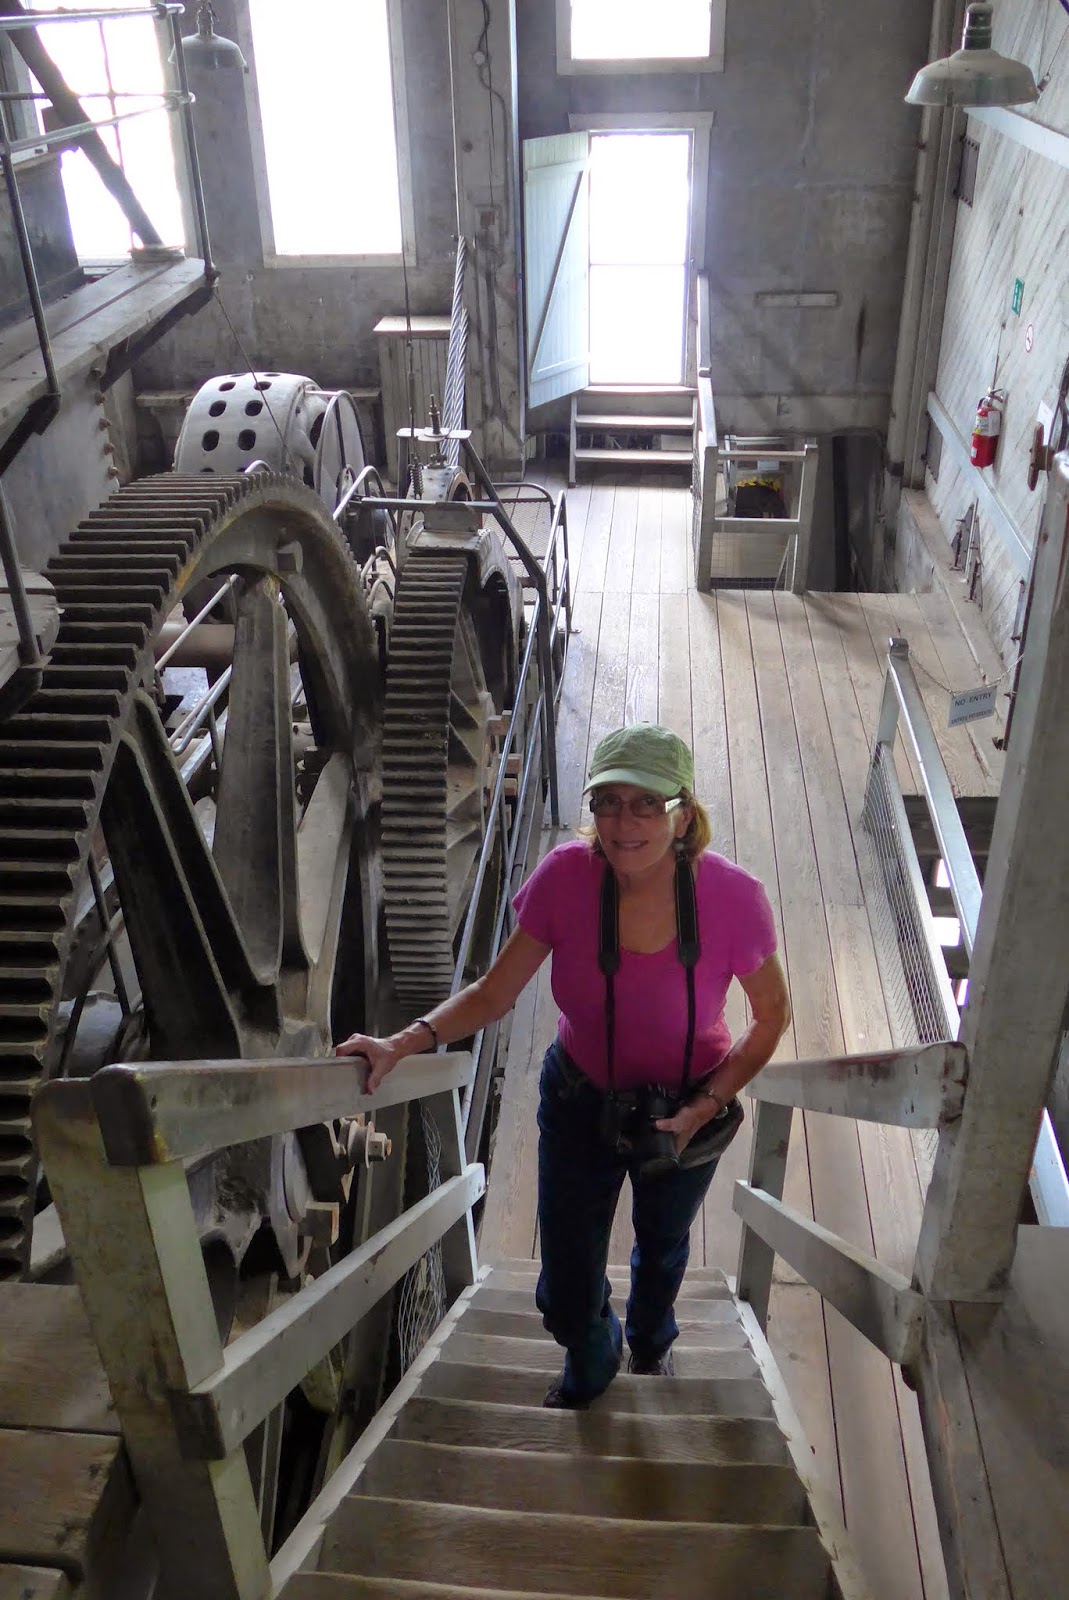 Liz walking up the stairs inside the dredge.